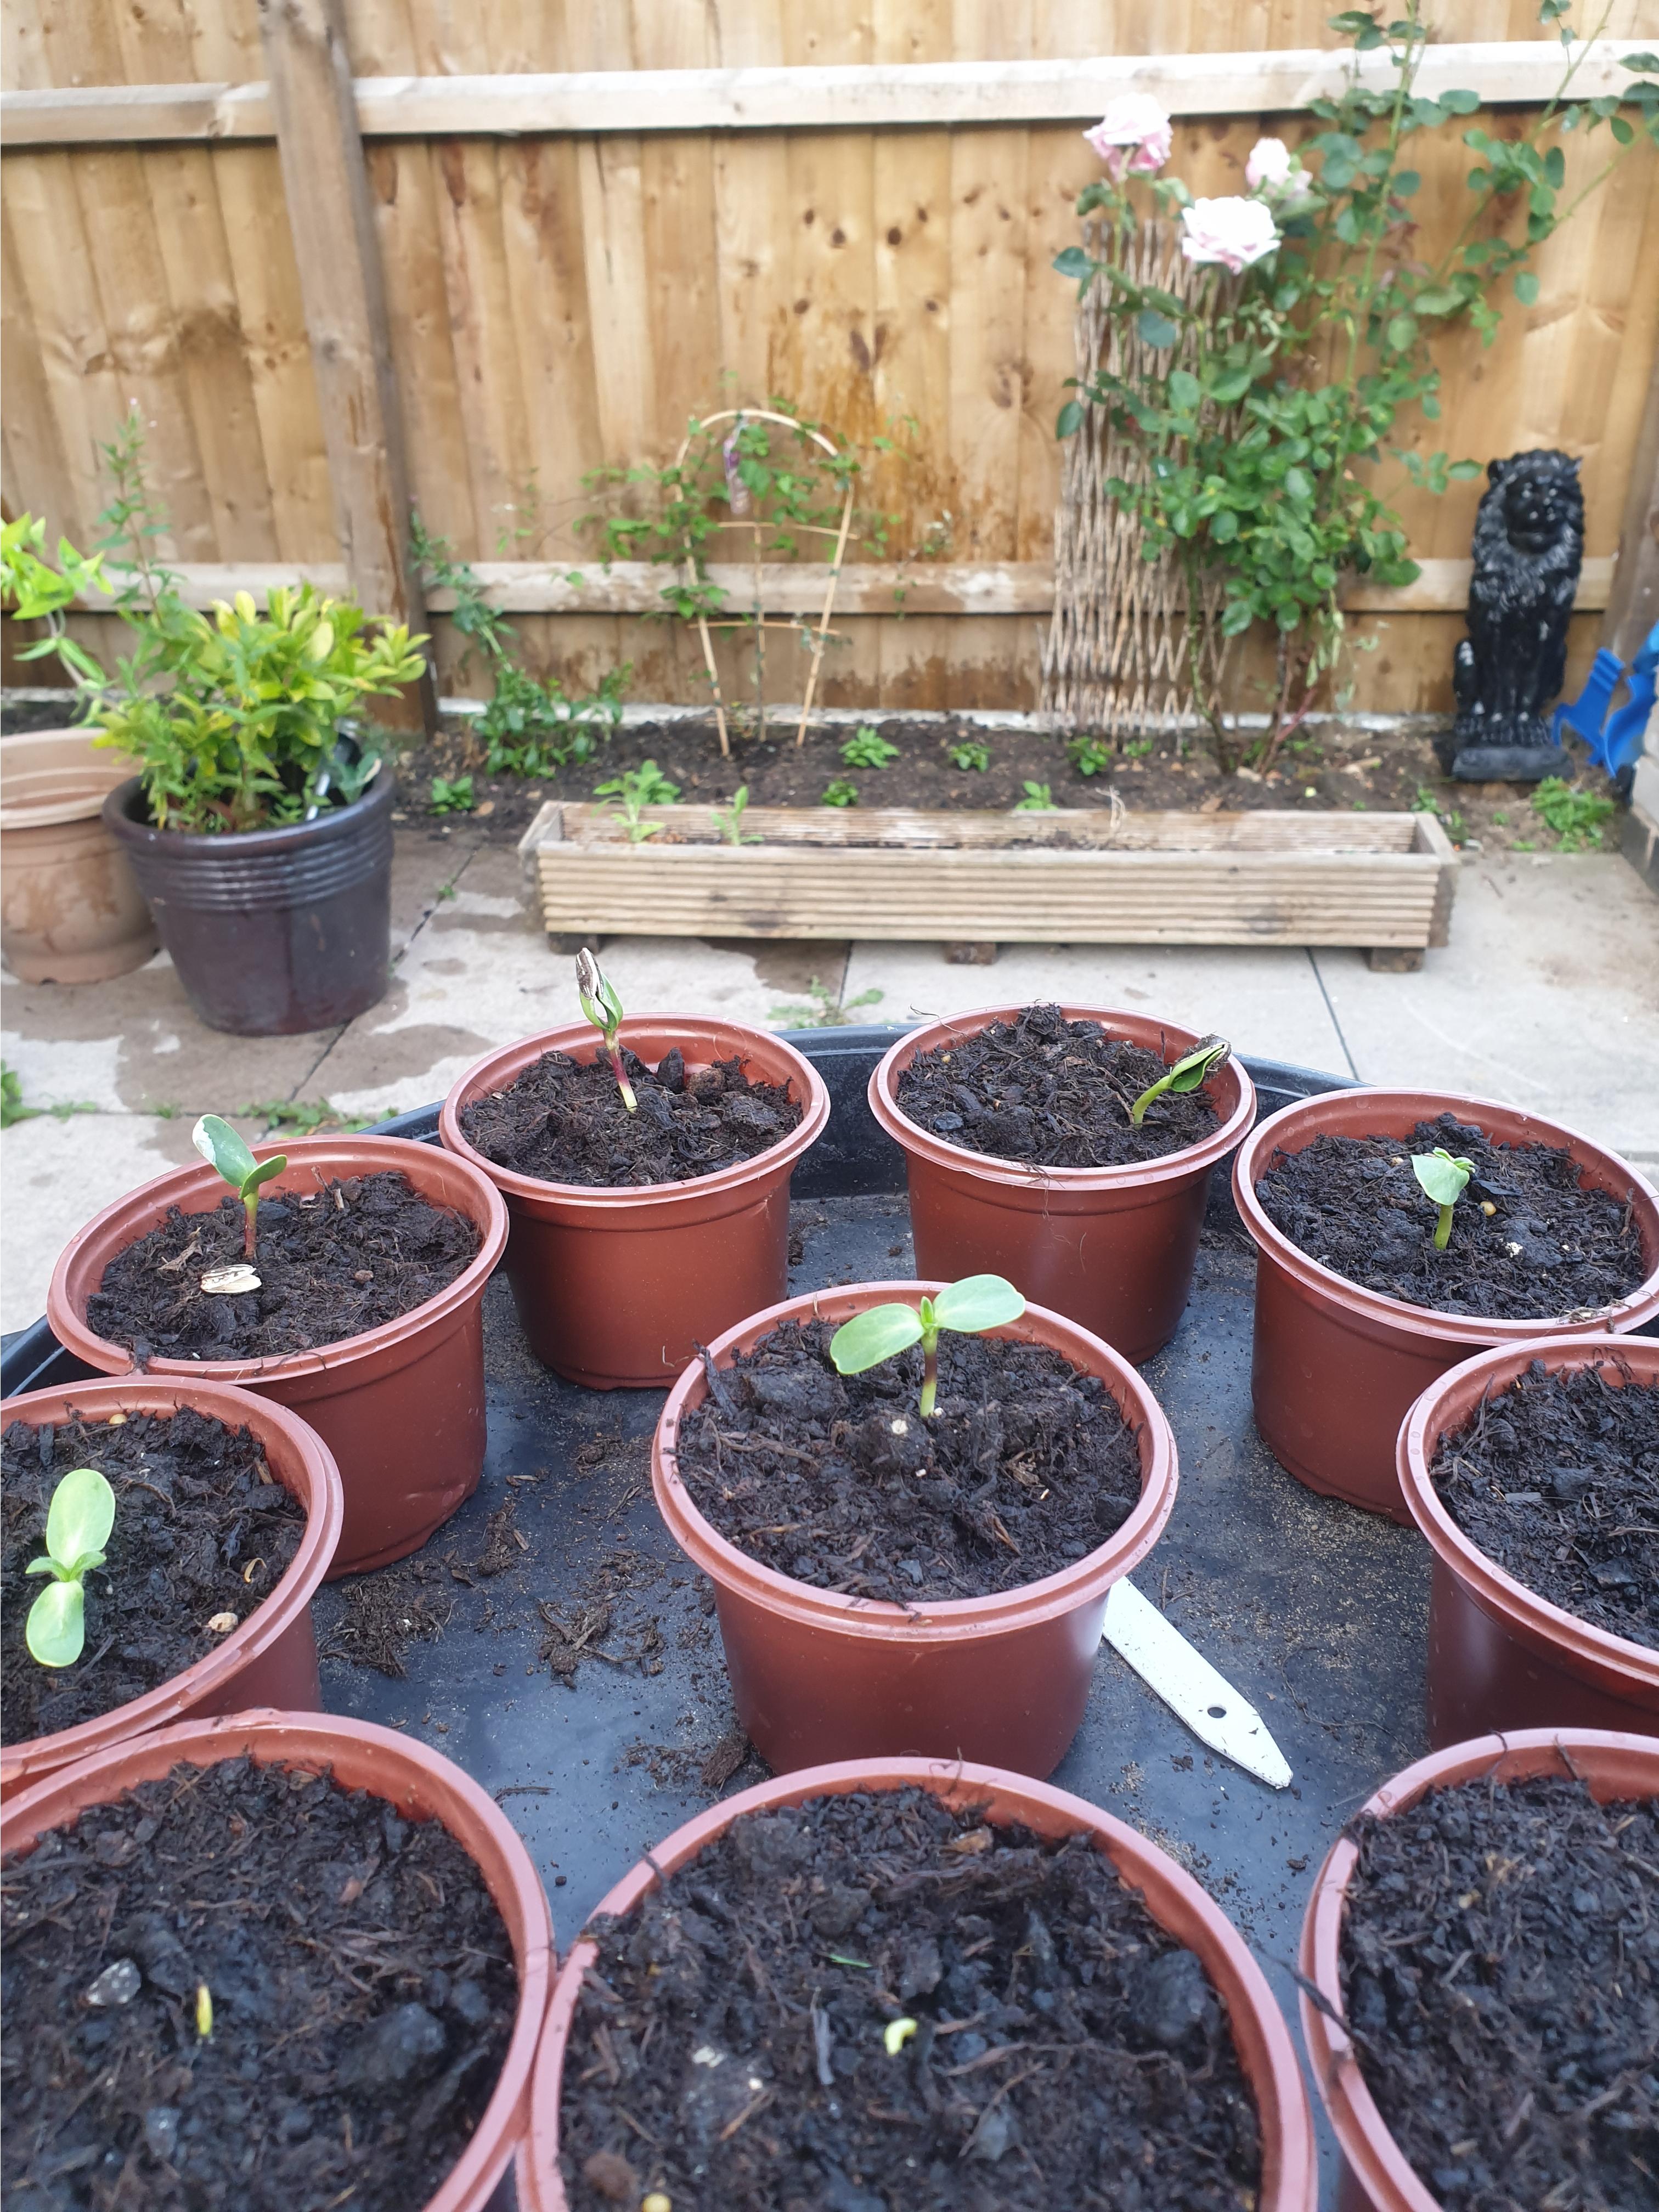 Omnia H - my sunflowers are growing